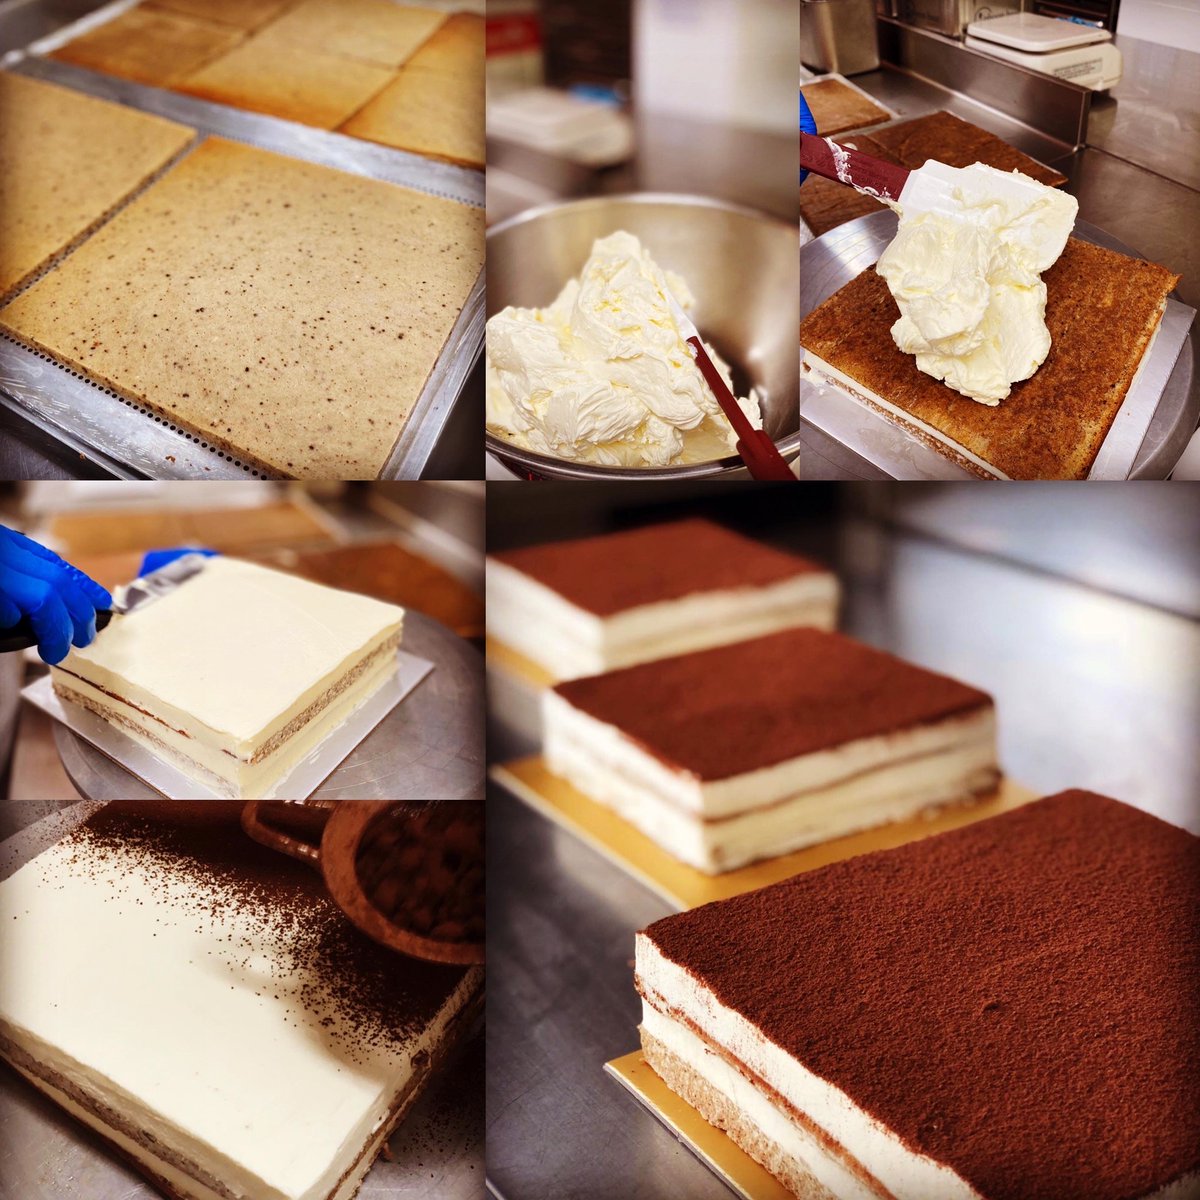 Locaba Singapore Tiramisu Is Italian And Means Lift Me Up Our Famous Delicious Tiramisu Does That But Keeps Your Bloodsugar Down Locaba Lowcarb Bakery Refinedsugarfree Diabeticfriendly Glutenfree Cleanbaking Keto